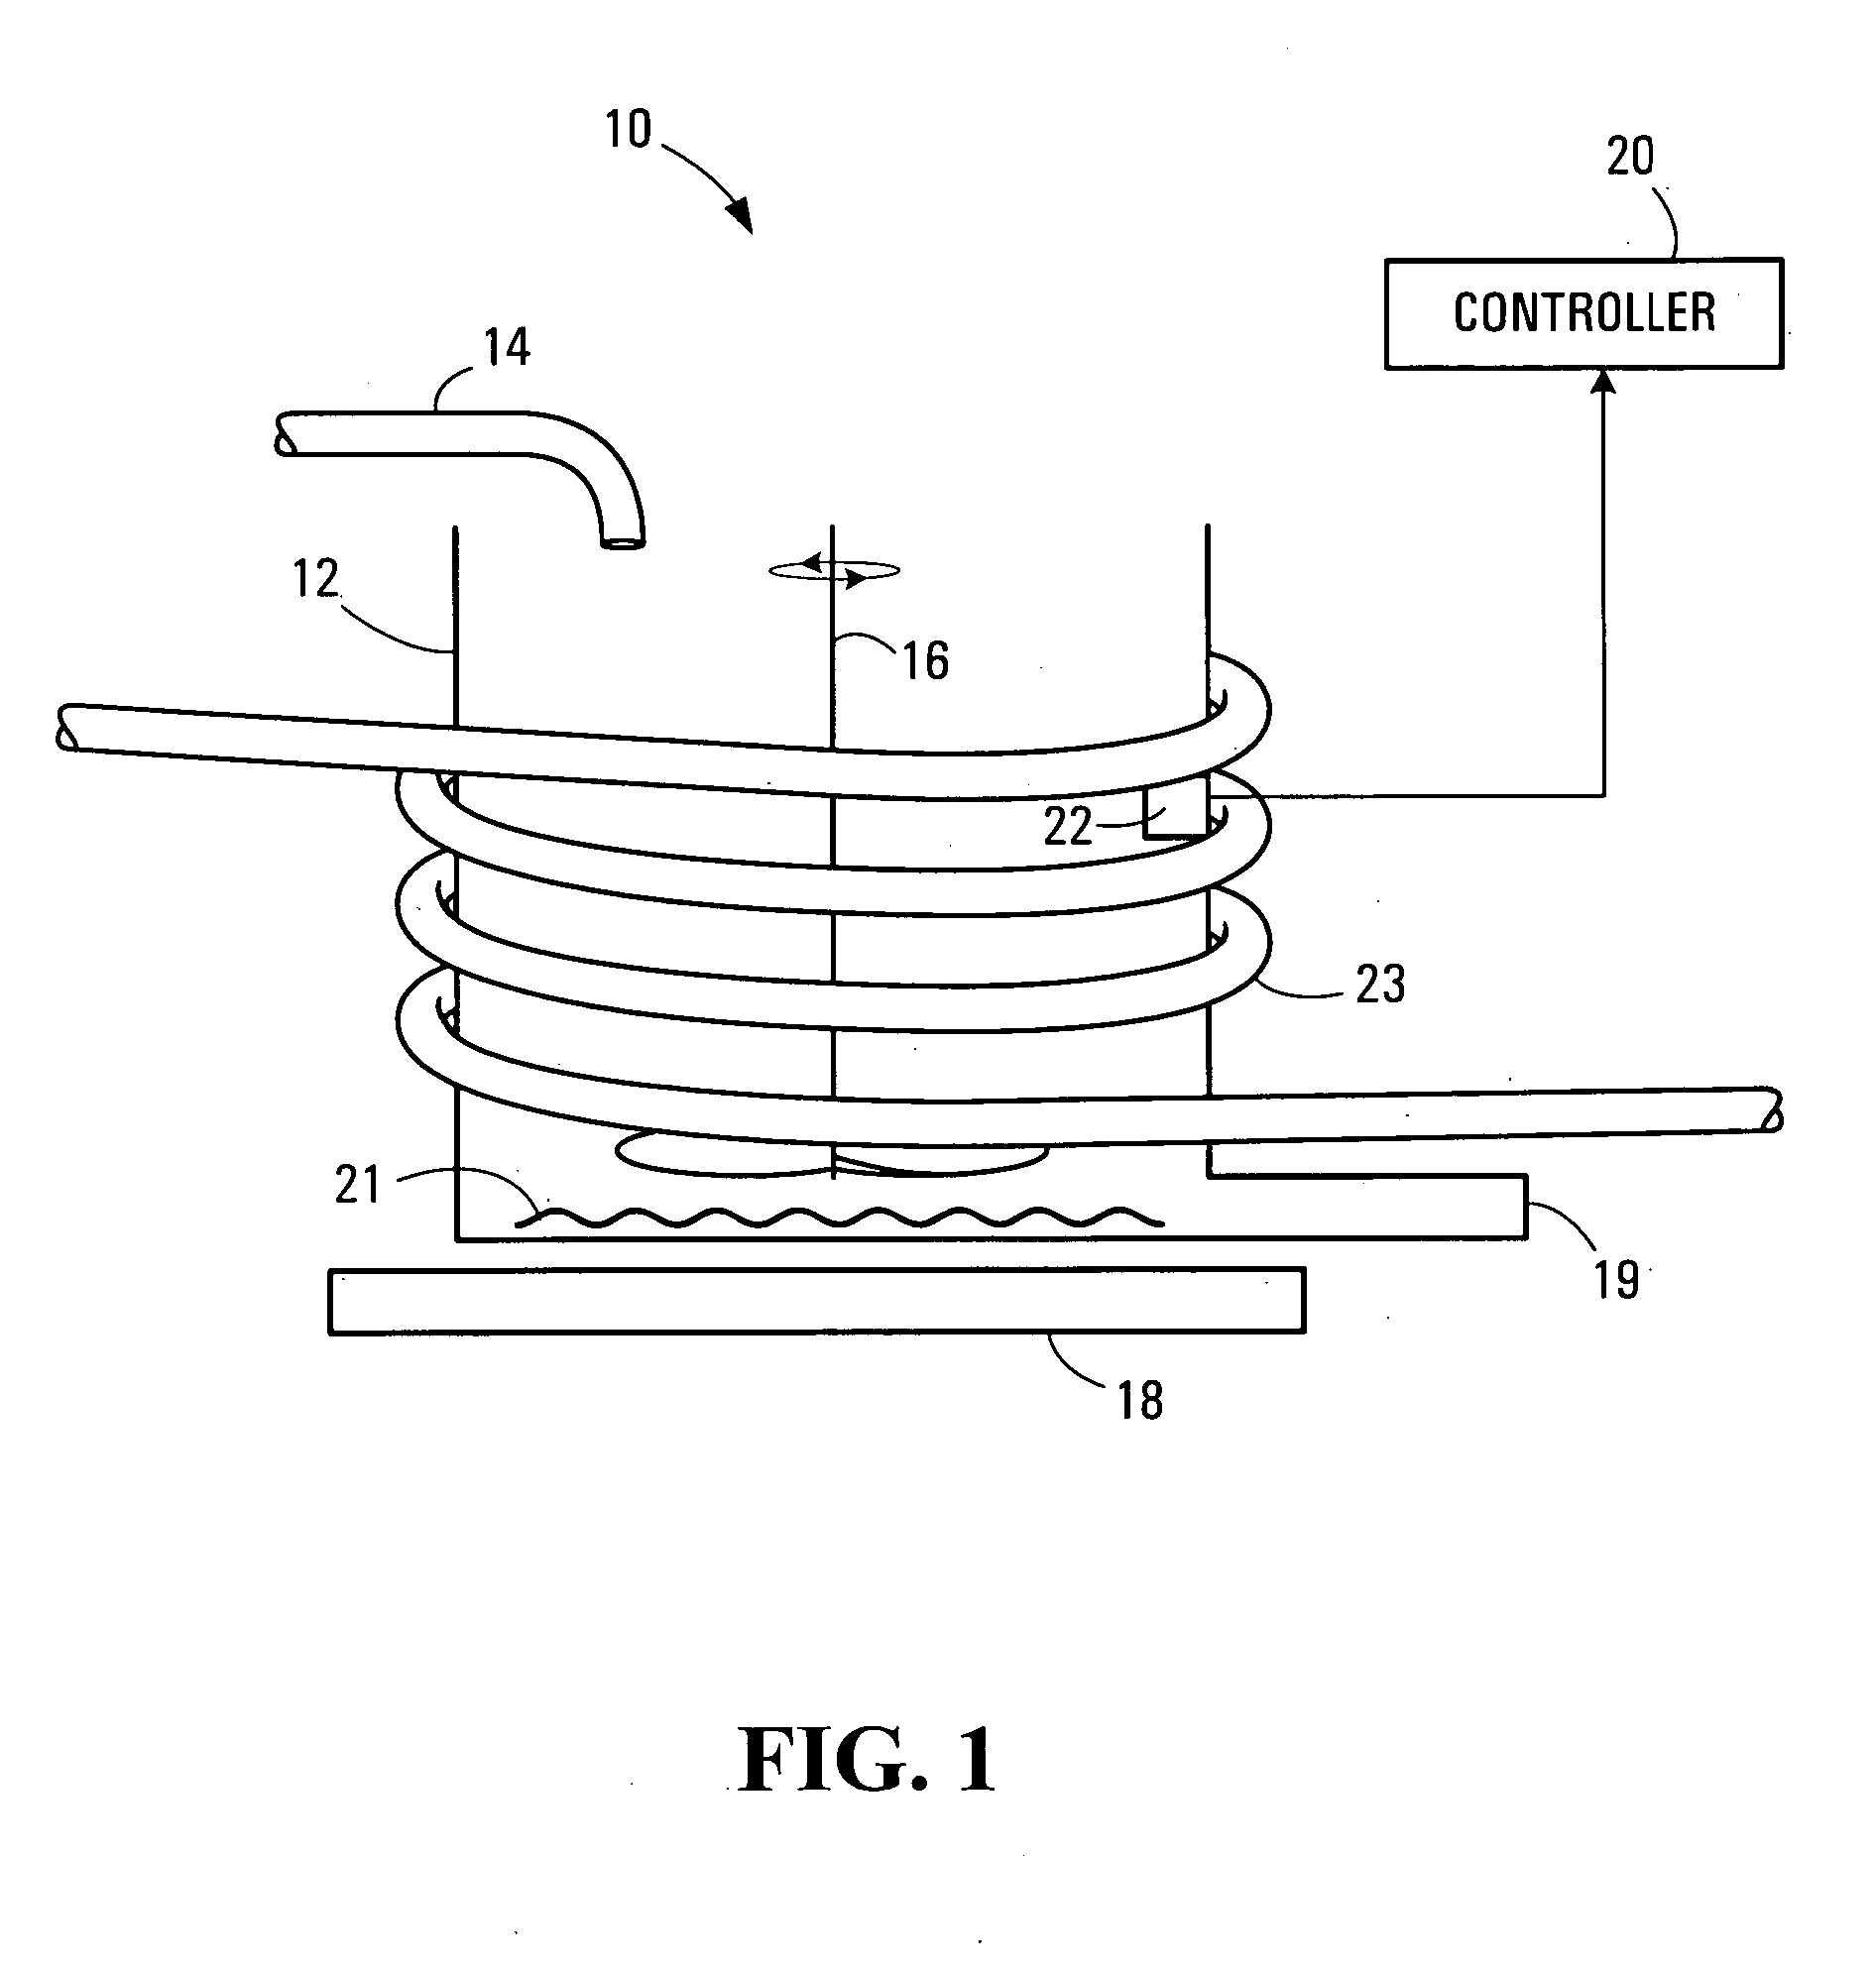 Method and apparatus for controlling a polymerization reaction